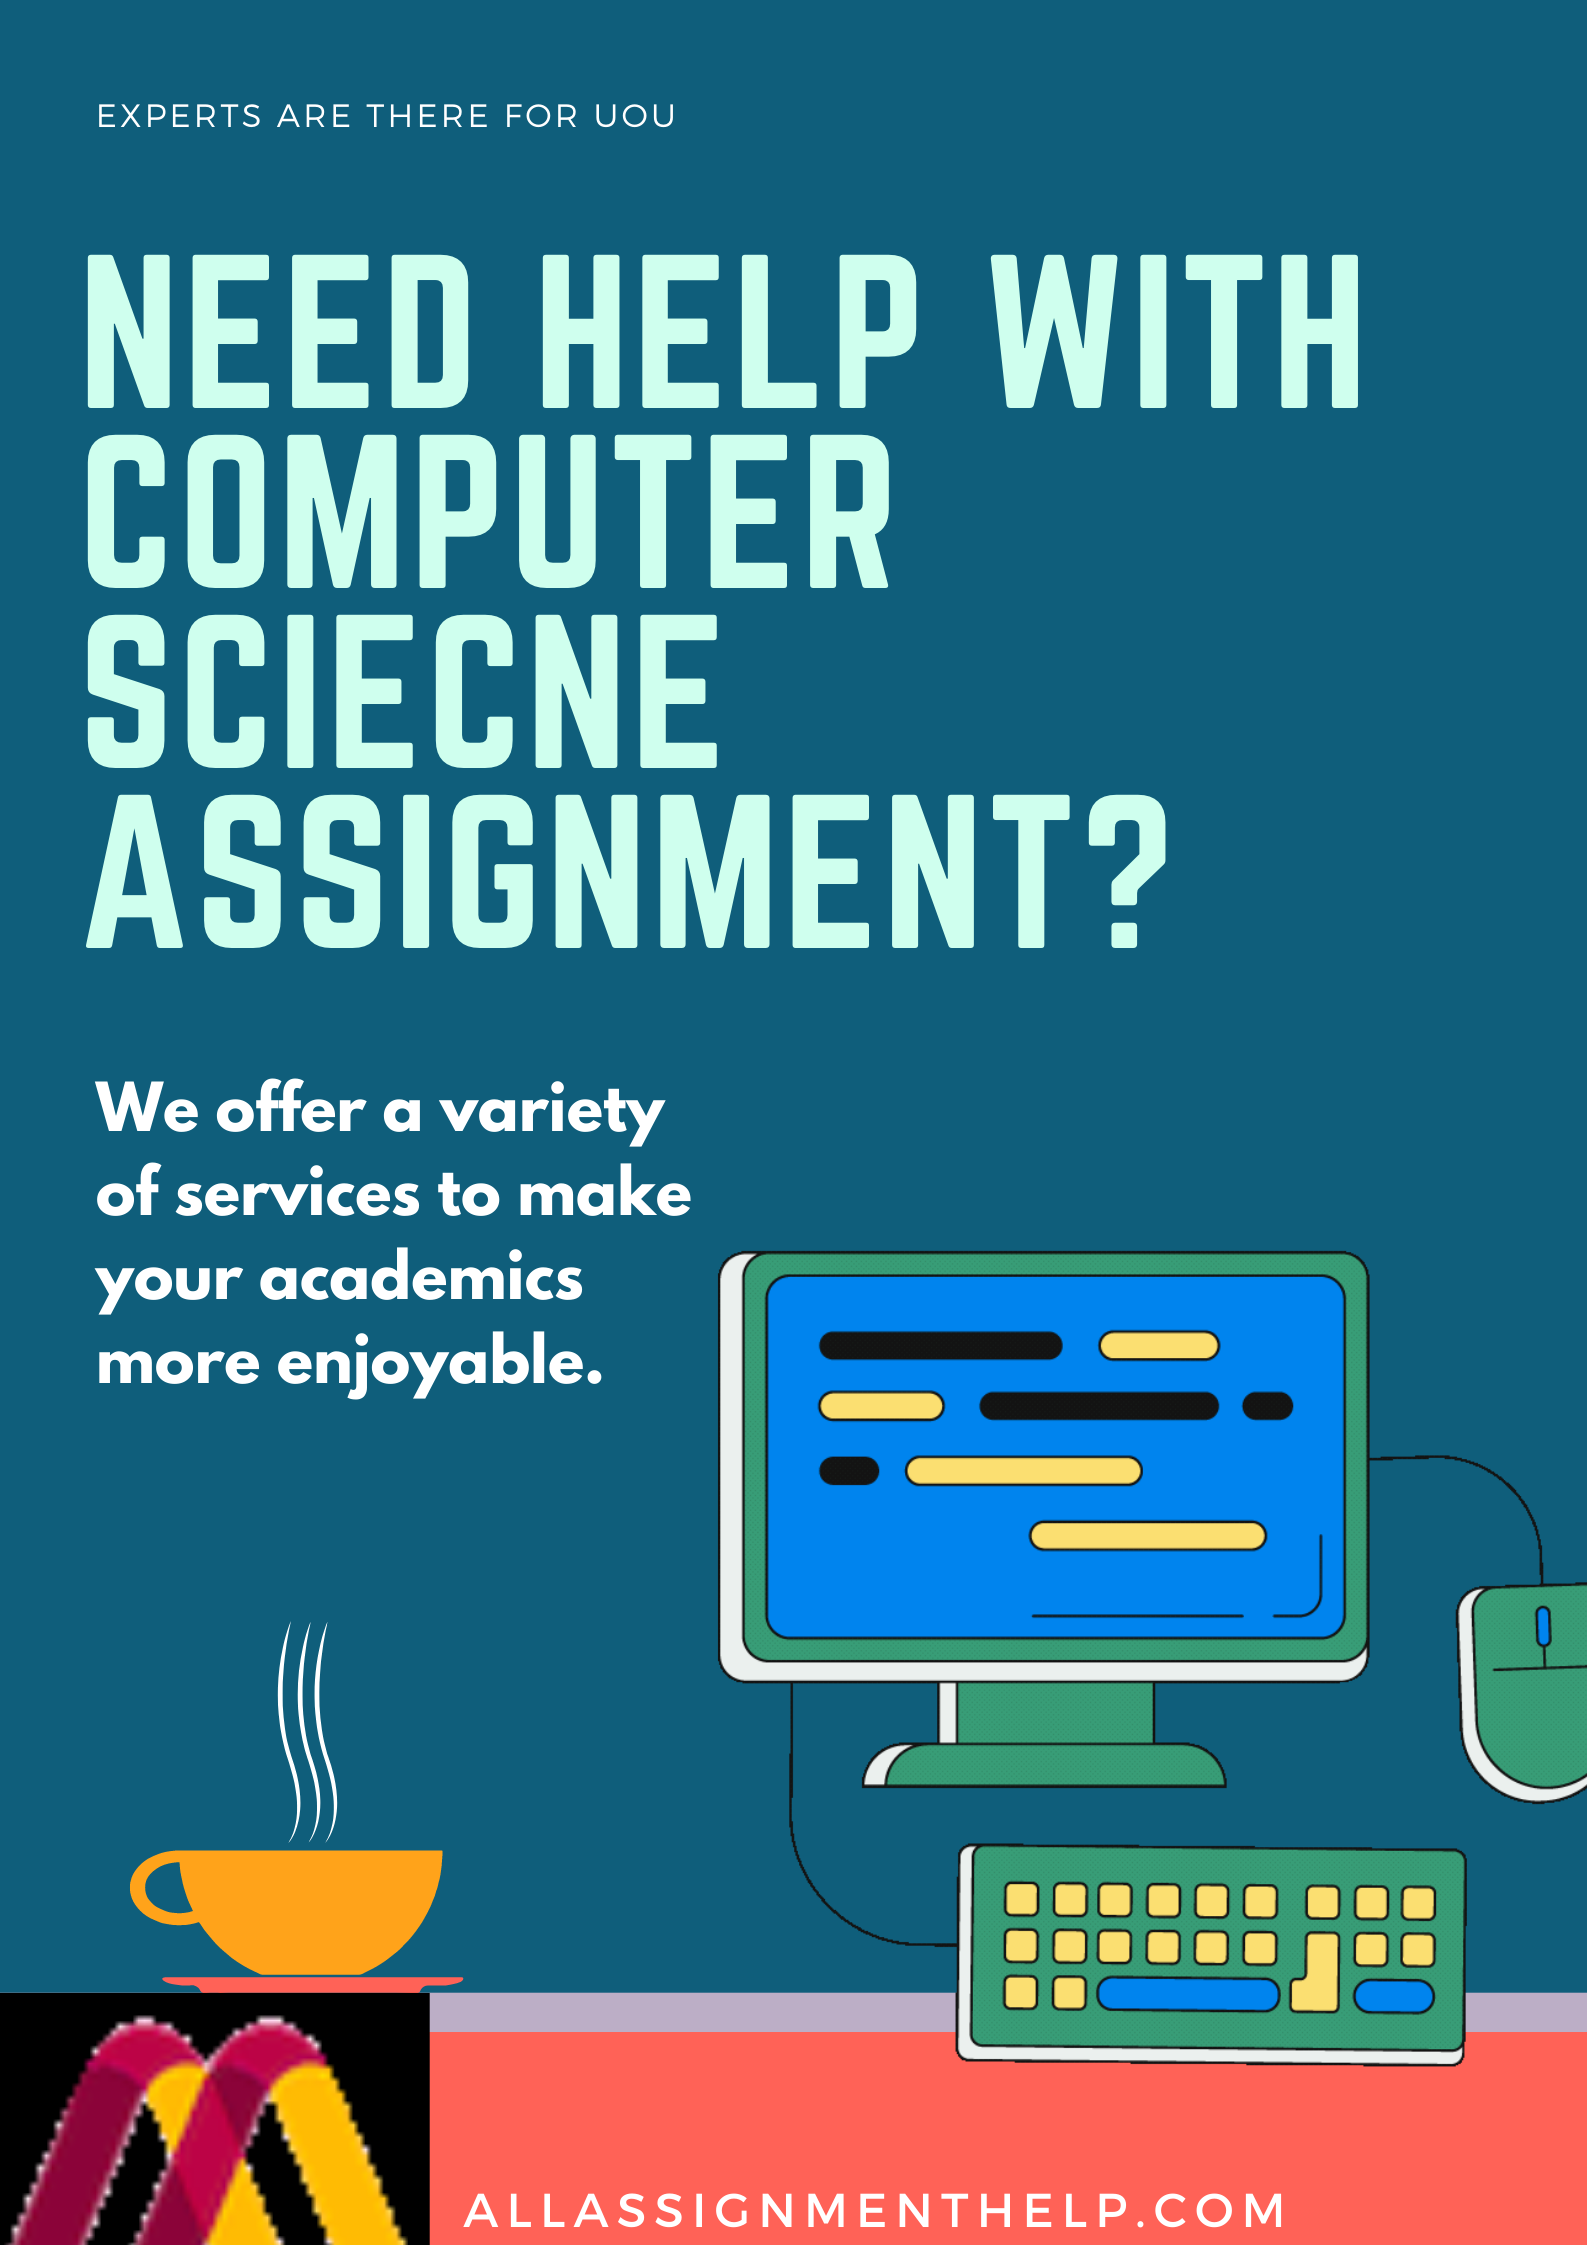 assignment meaning computer science